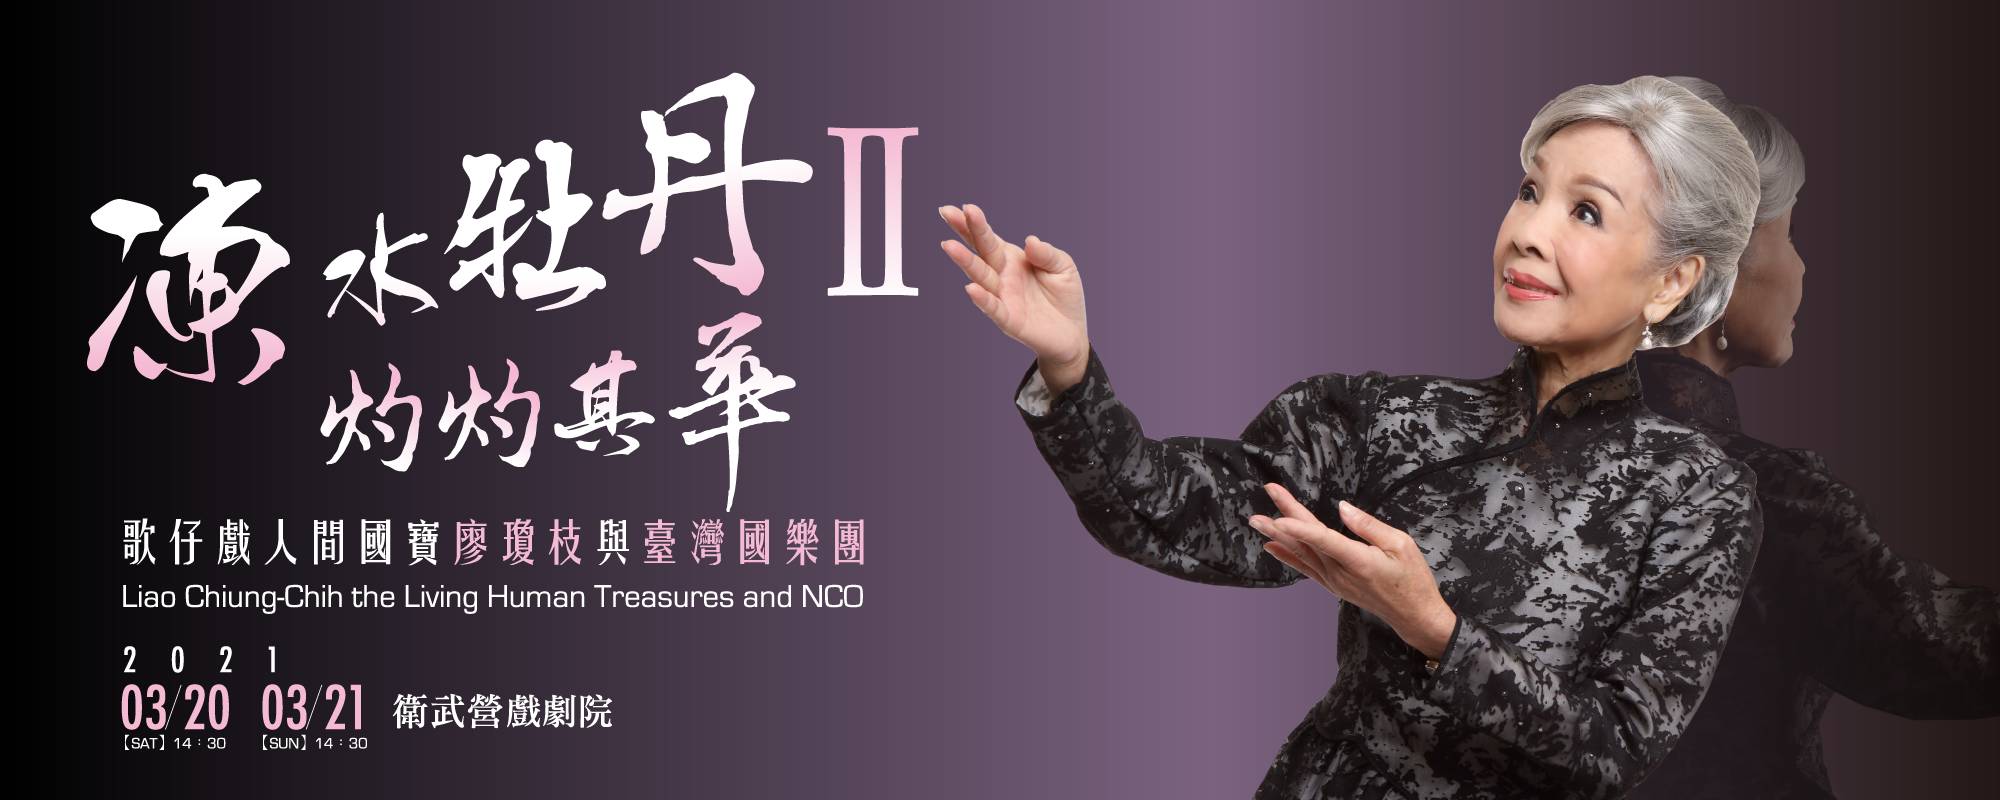 LIAO Chiung-chih - The Living Human Treasures and NCO